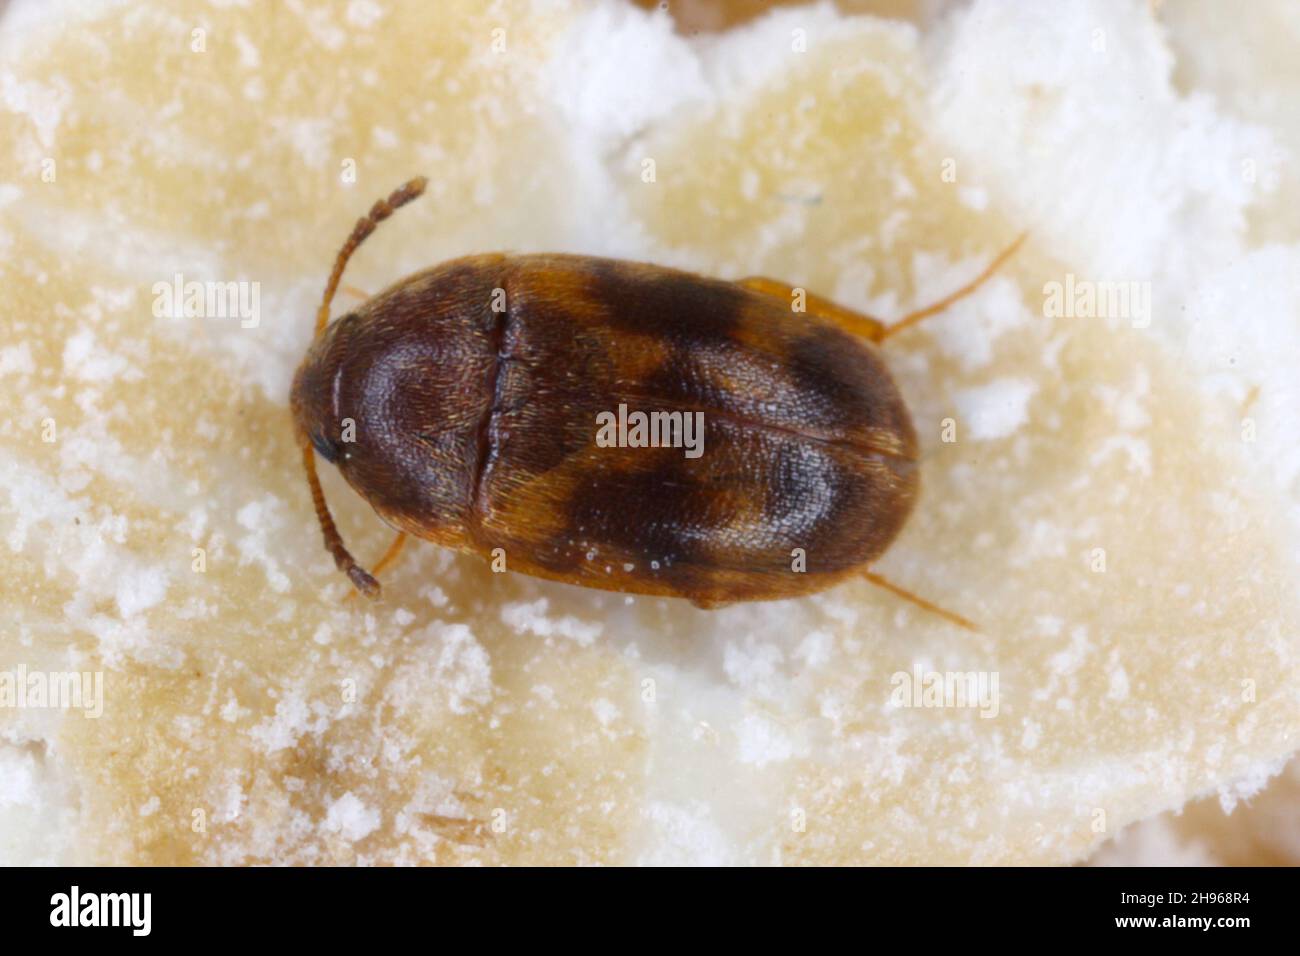 The stored grain fungus beetle (Litargus balteatus) is a species of hairy fungus beetle in the family Mycetophagidae. Stock Photo